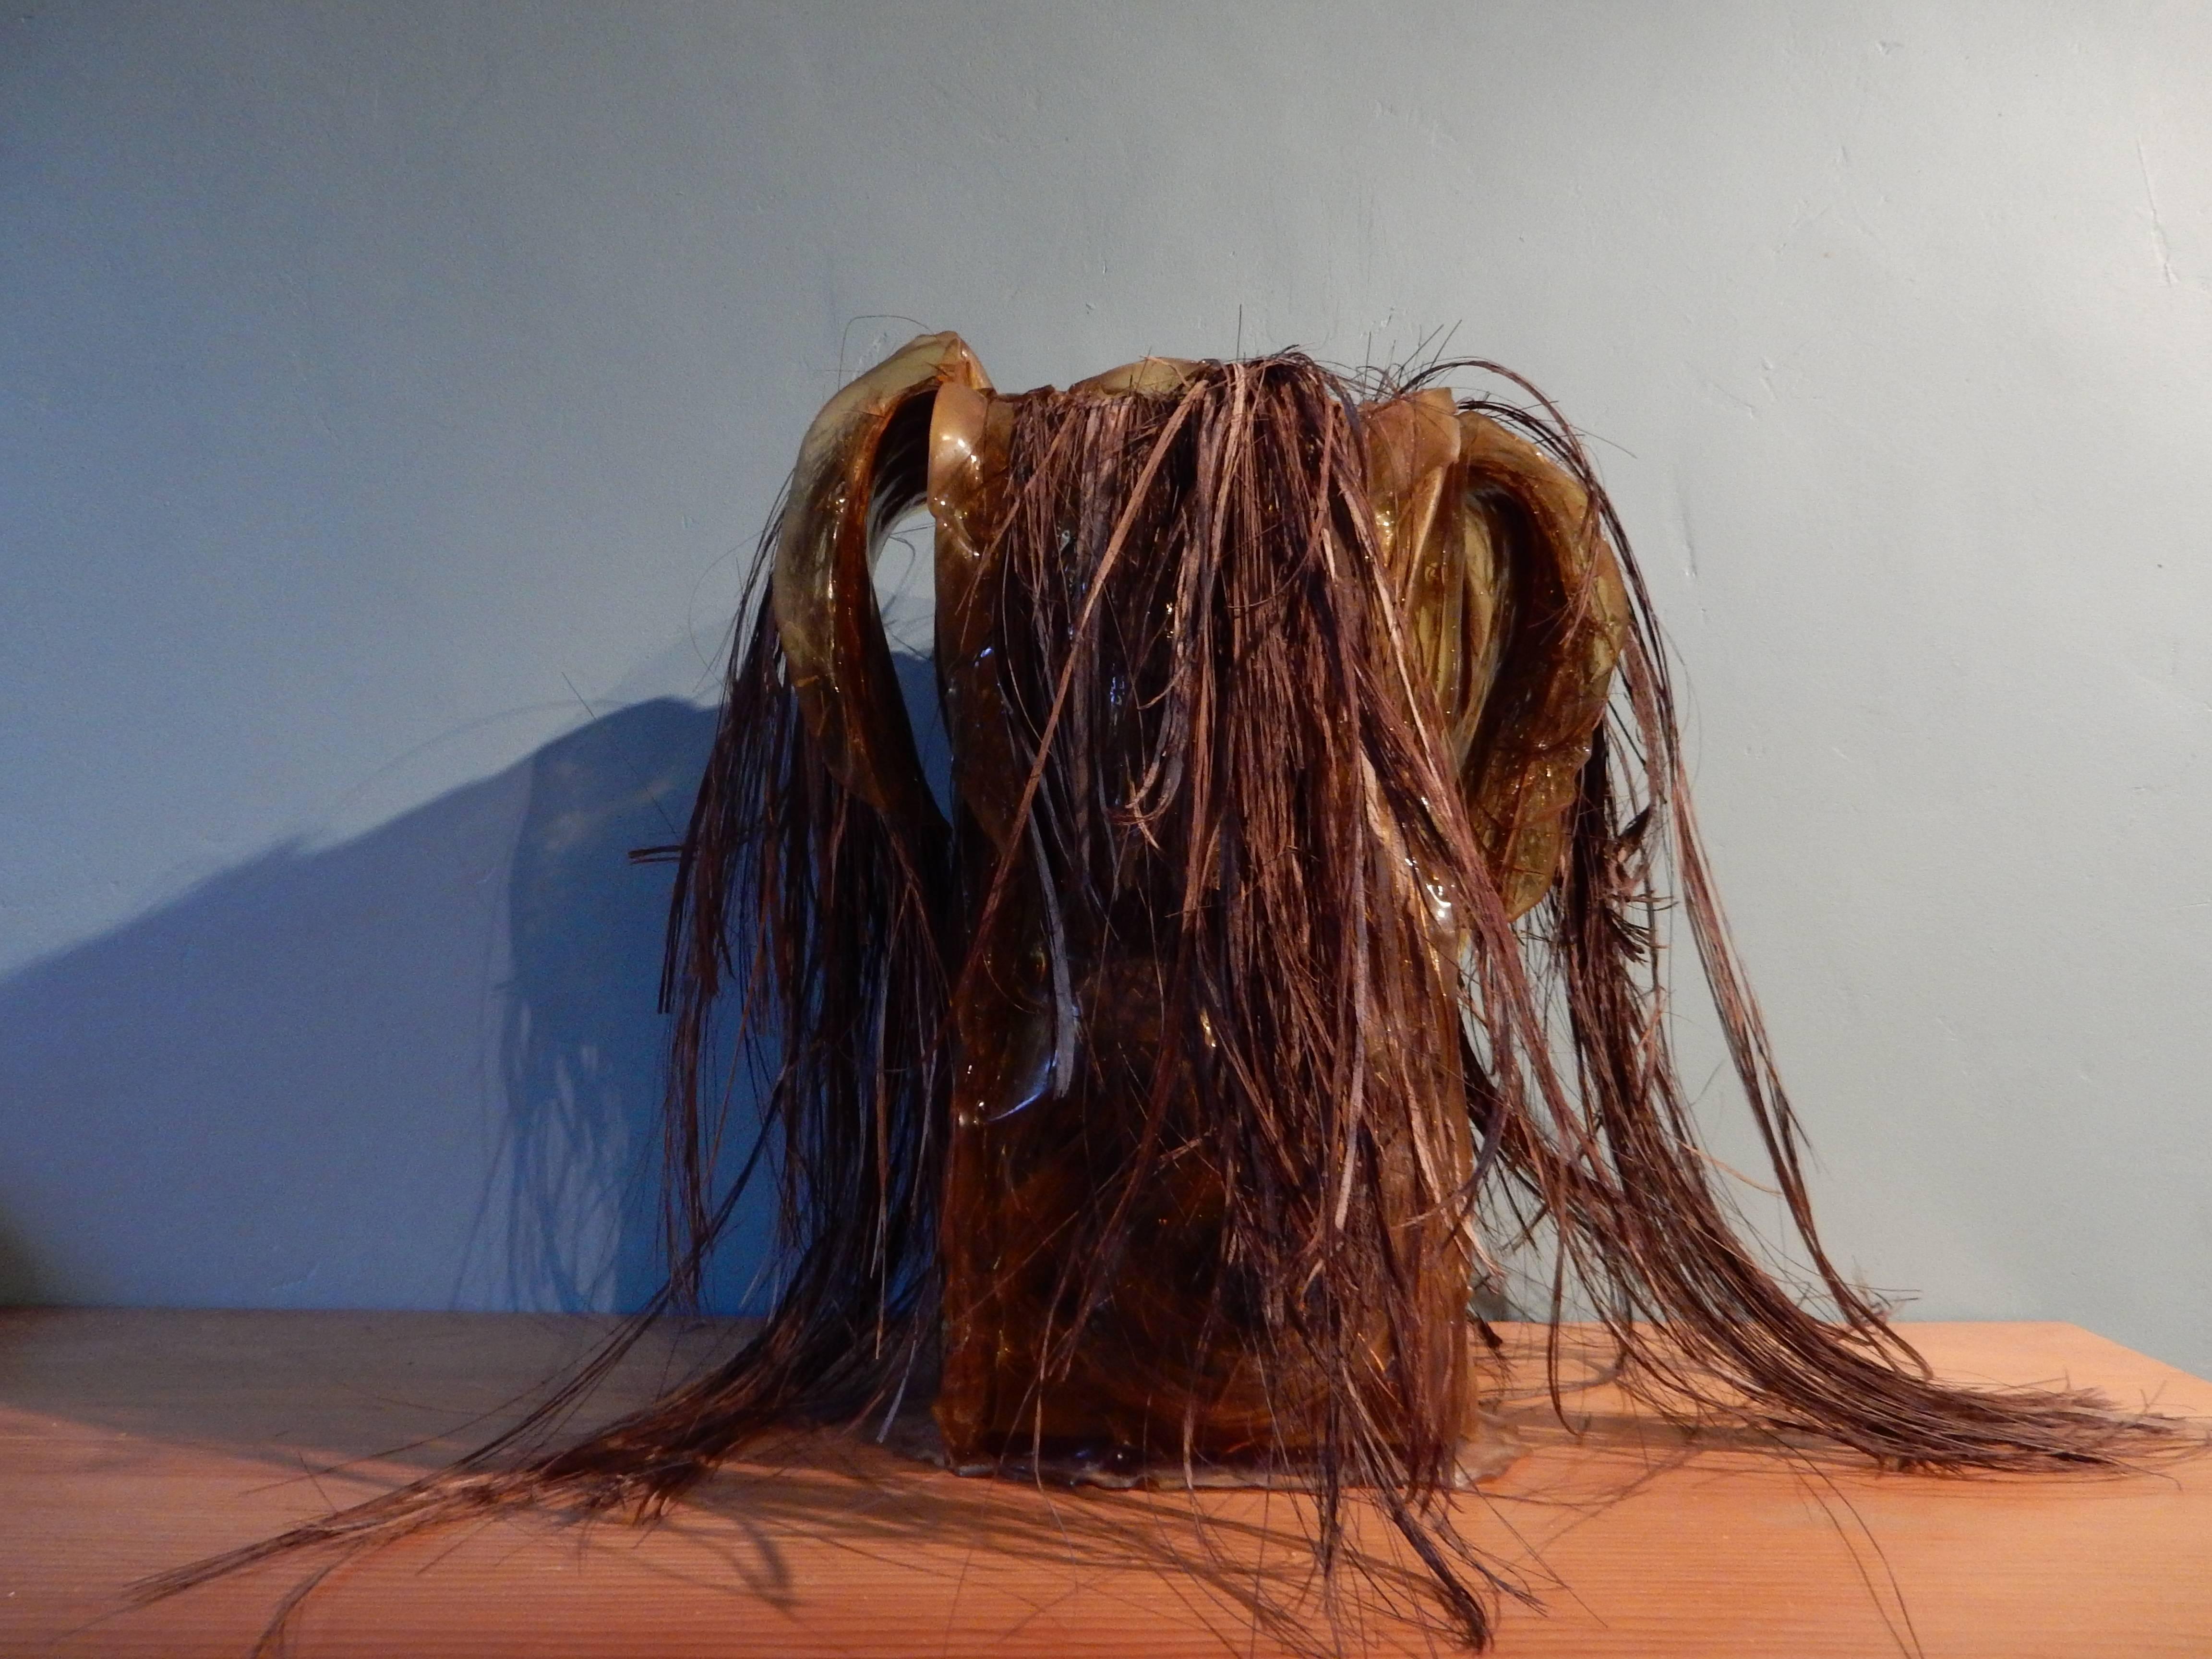 A piece unique vase prototype by Humberto and Fernando Campana called Nativo Campana, circa 2010. Made by Corsi Design
resine and vegetal imitation of hair.